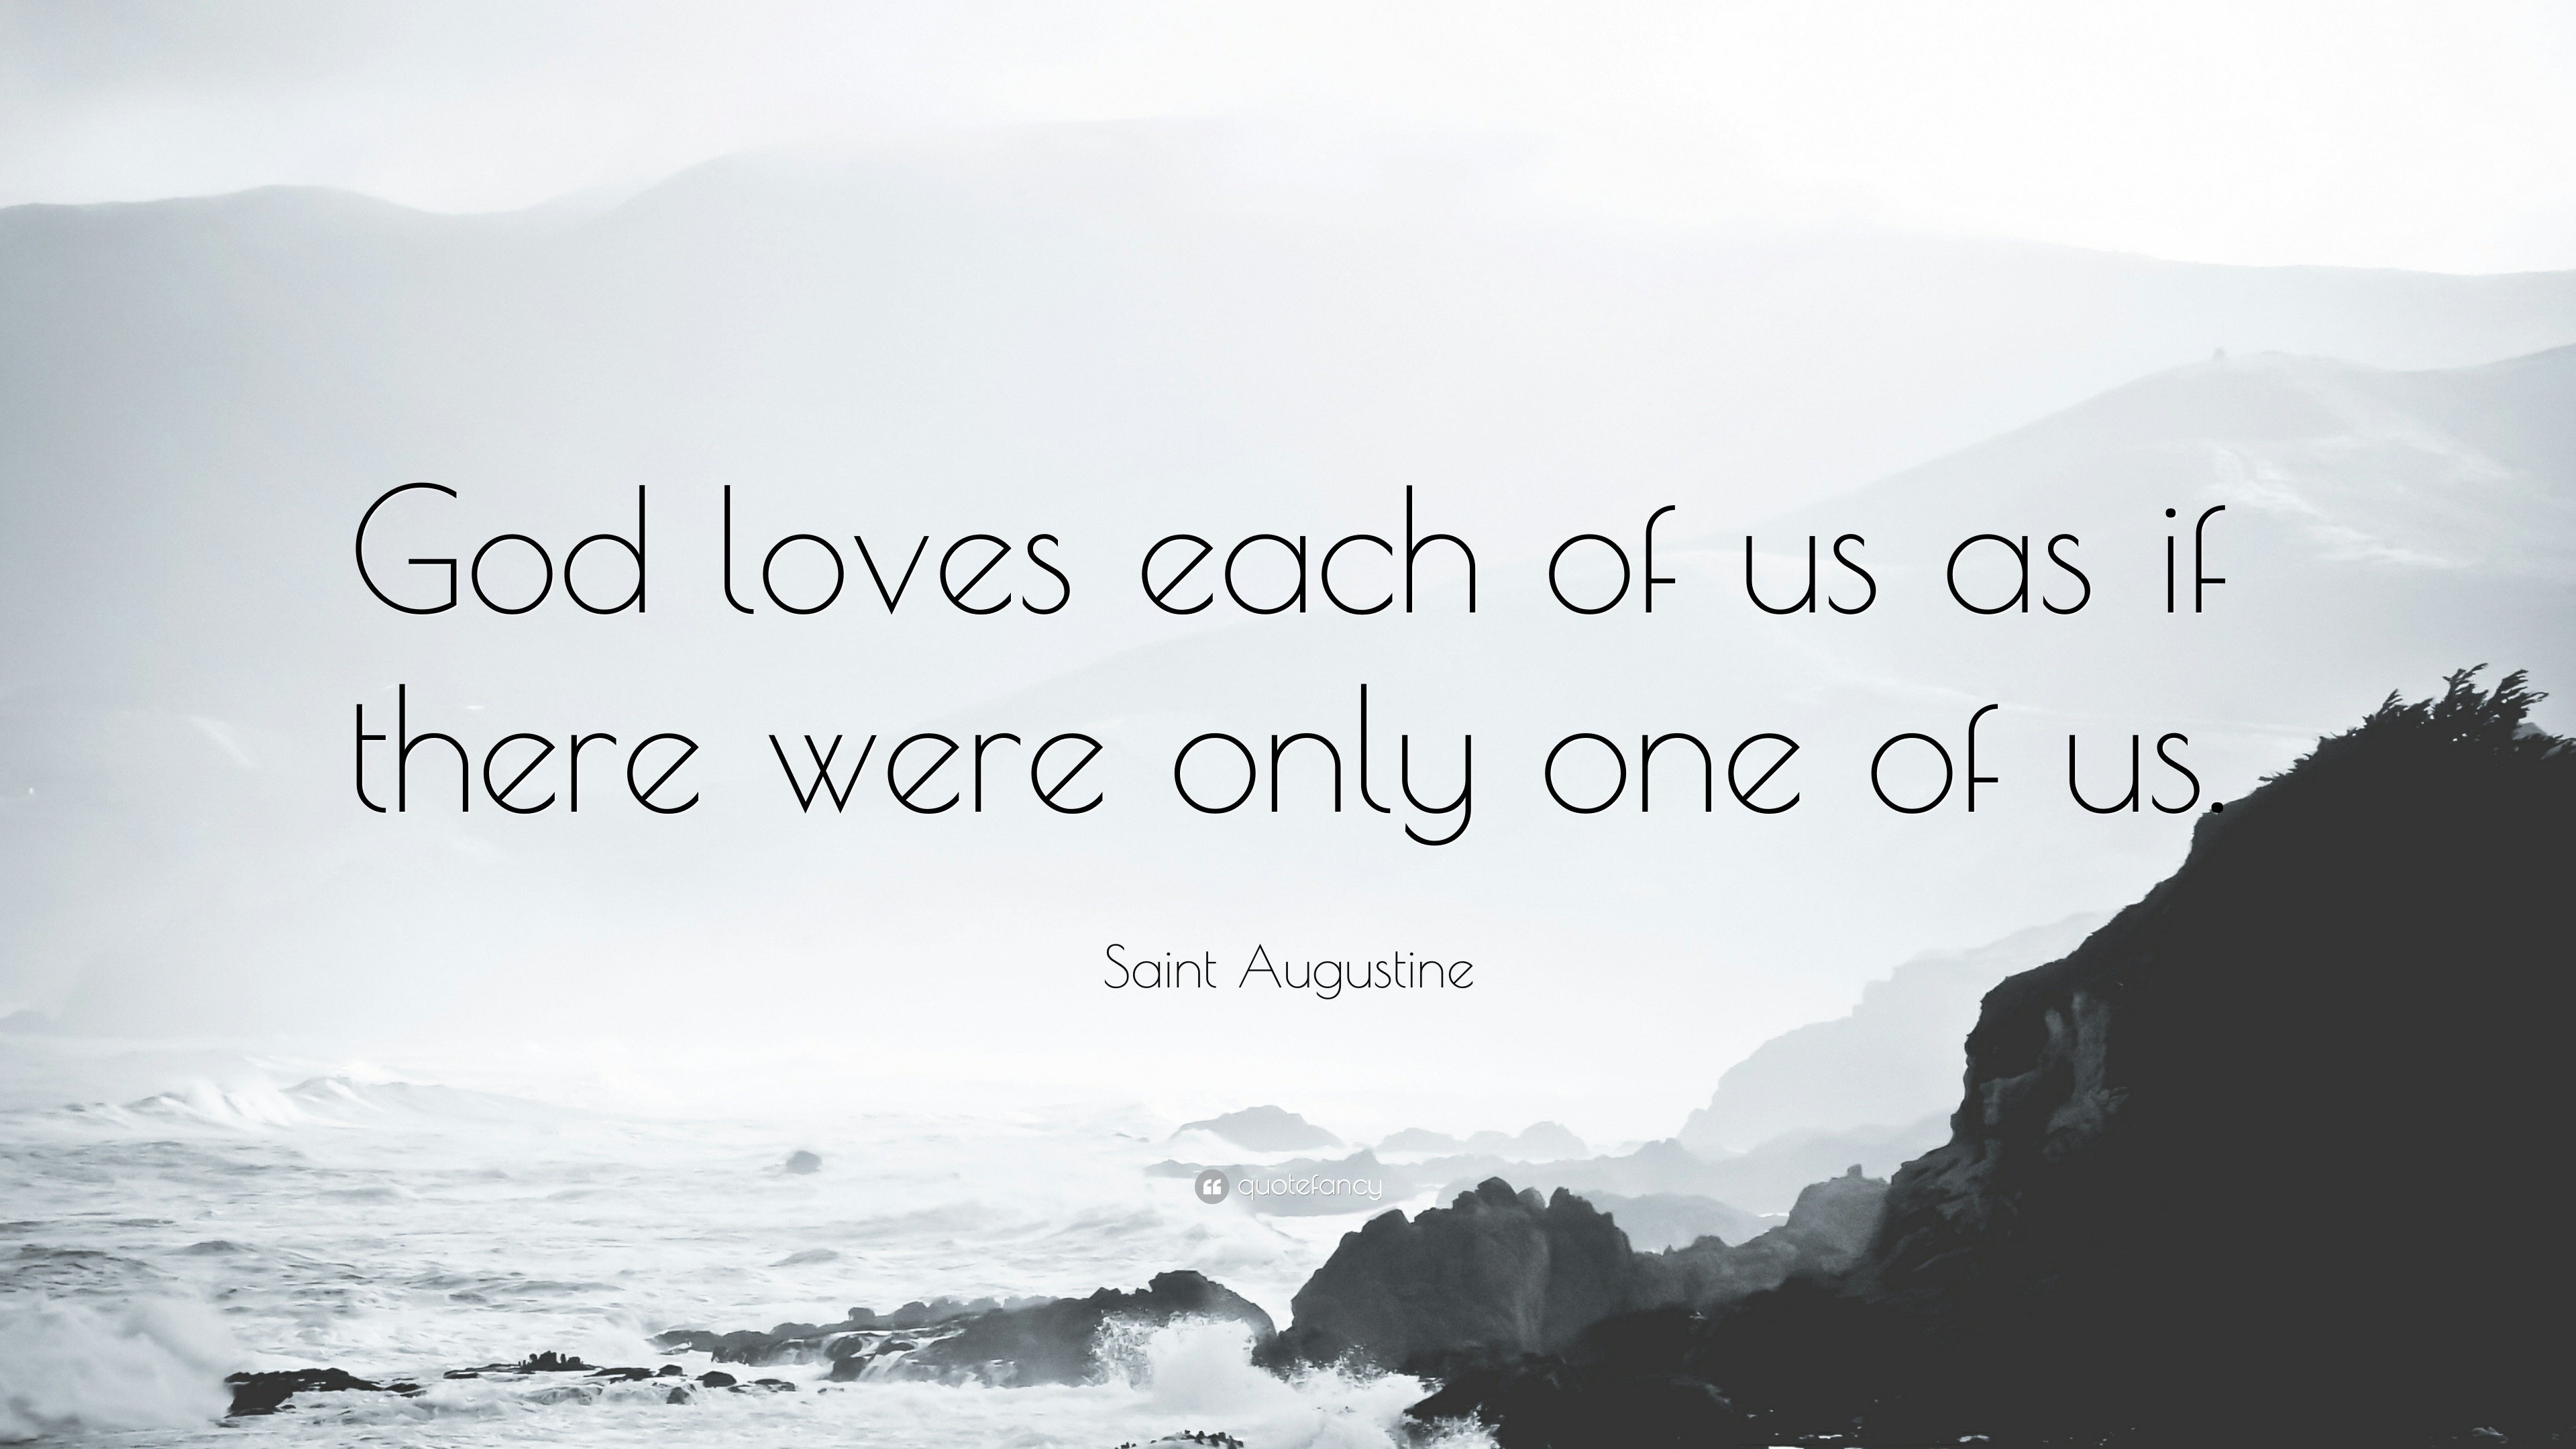 Saint Augustine Quote “God loves each of us as if there were only one